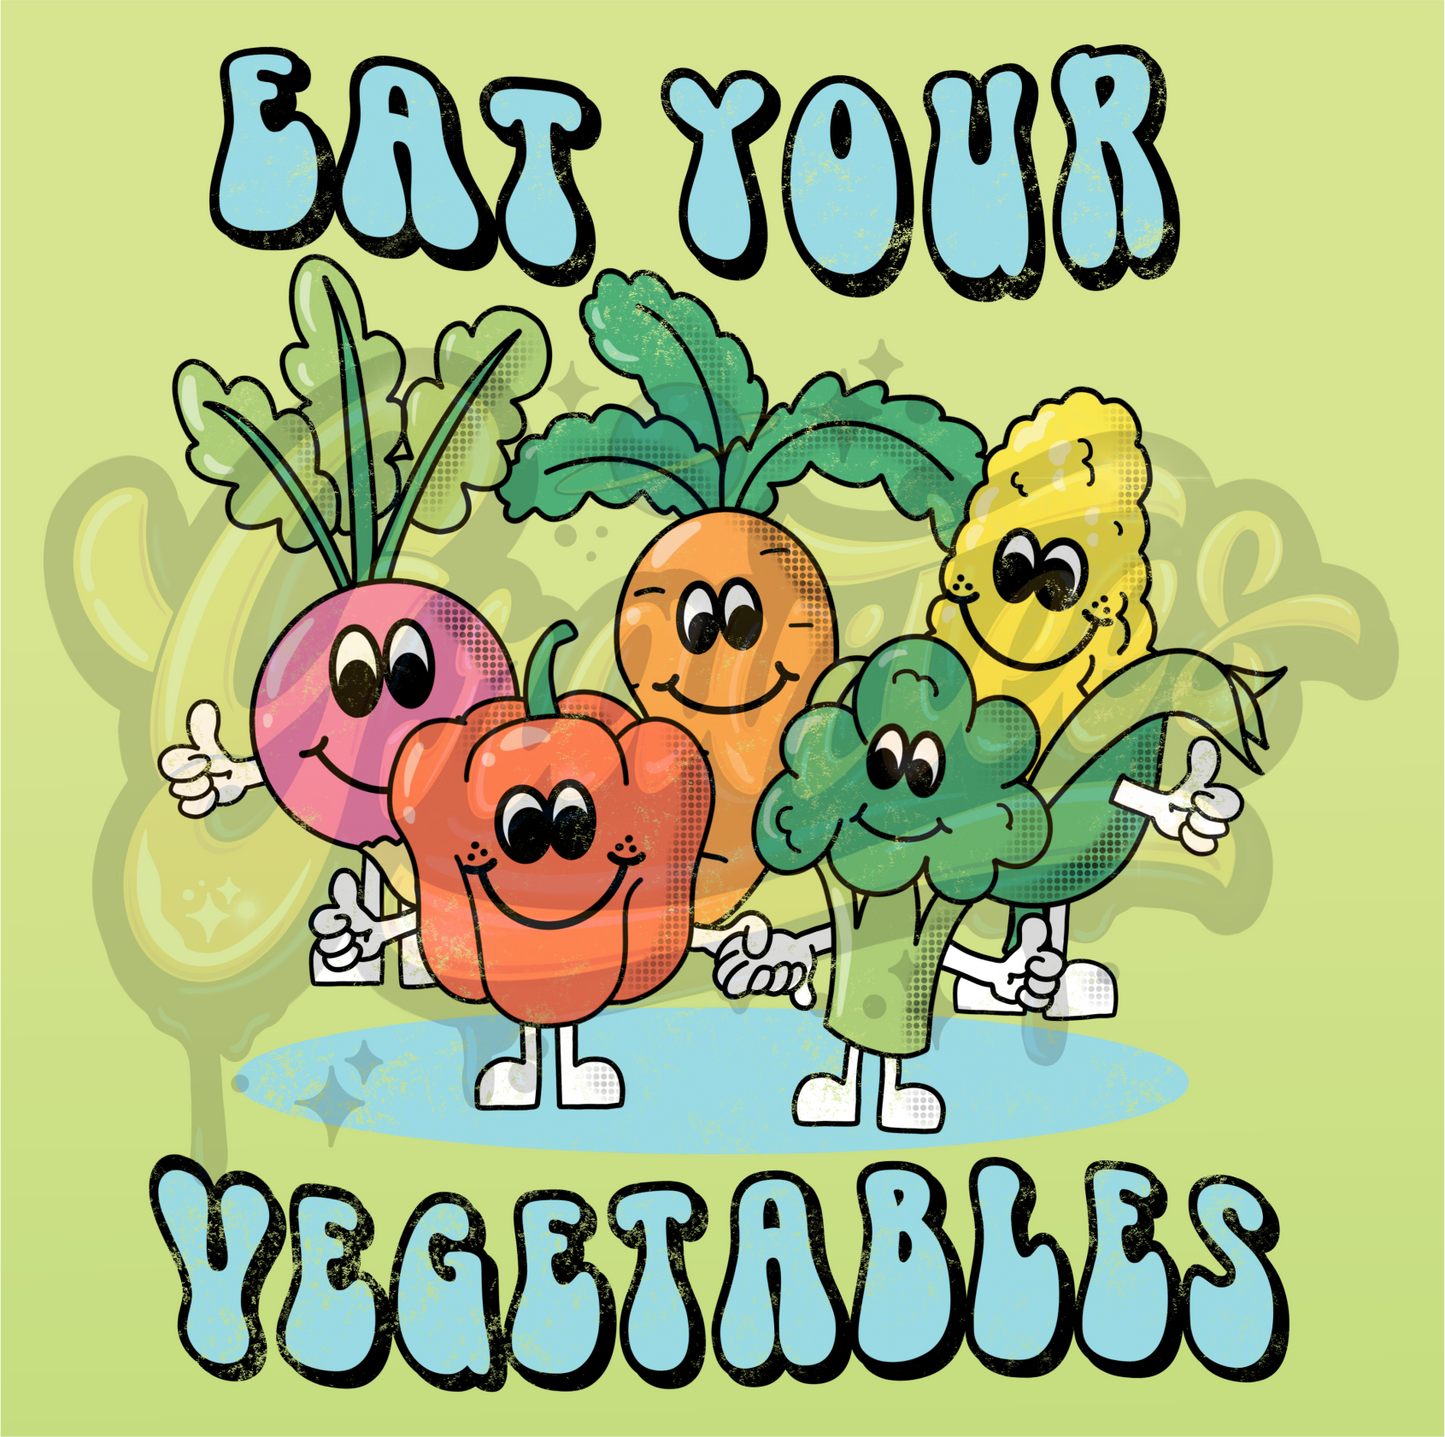 Eat Your Vegetables PNG, Vegetable Clipart, Veggies Clipart for DTF or Shirt Printing, PNG Only!